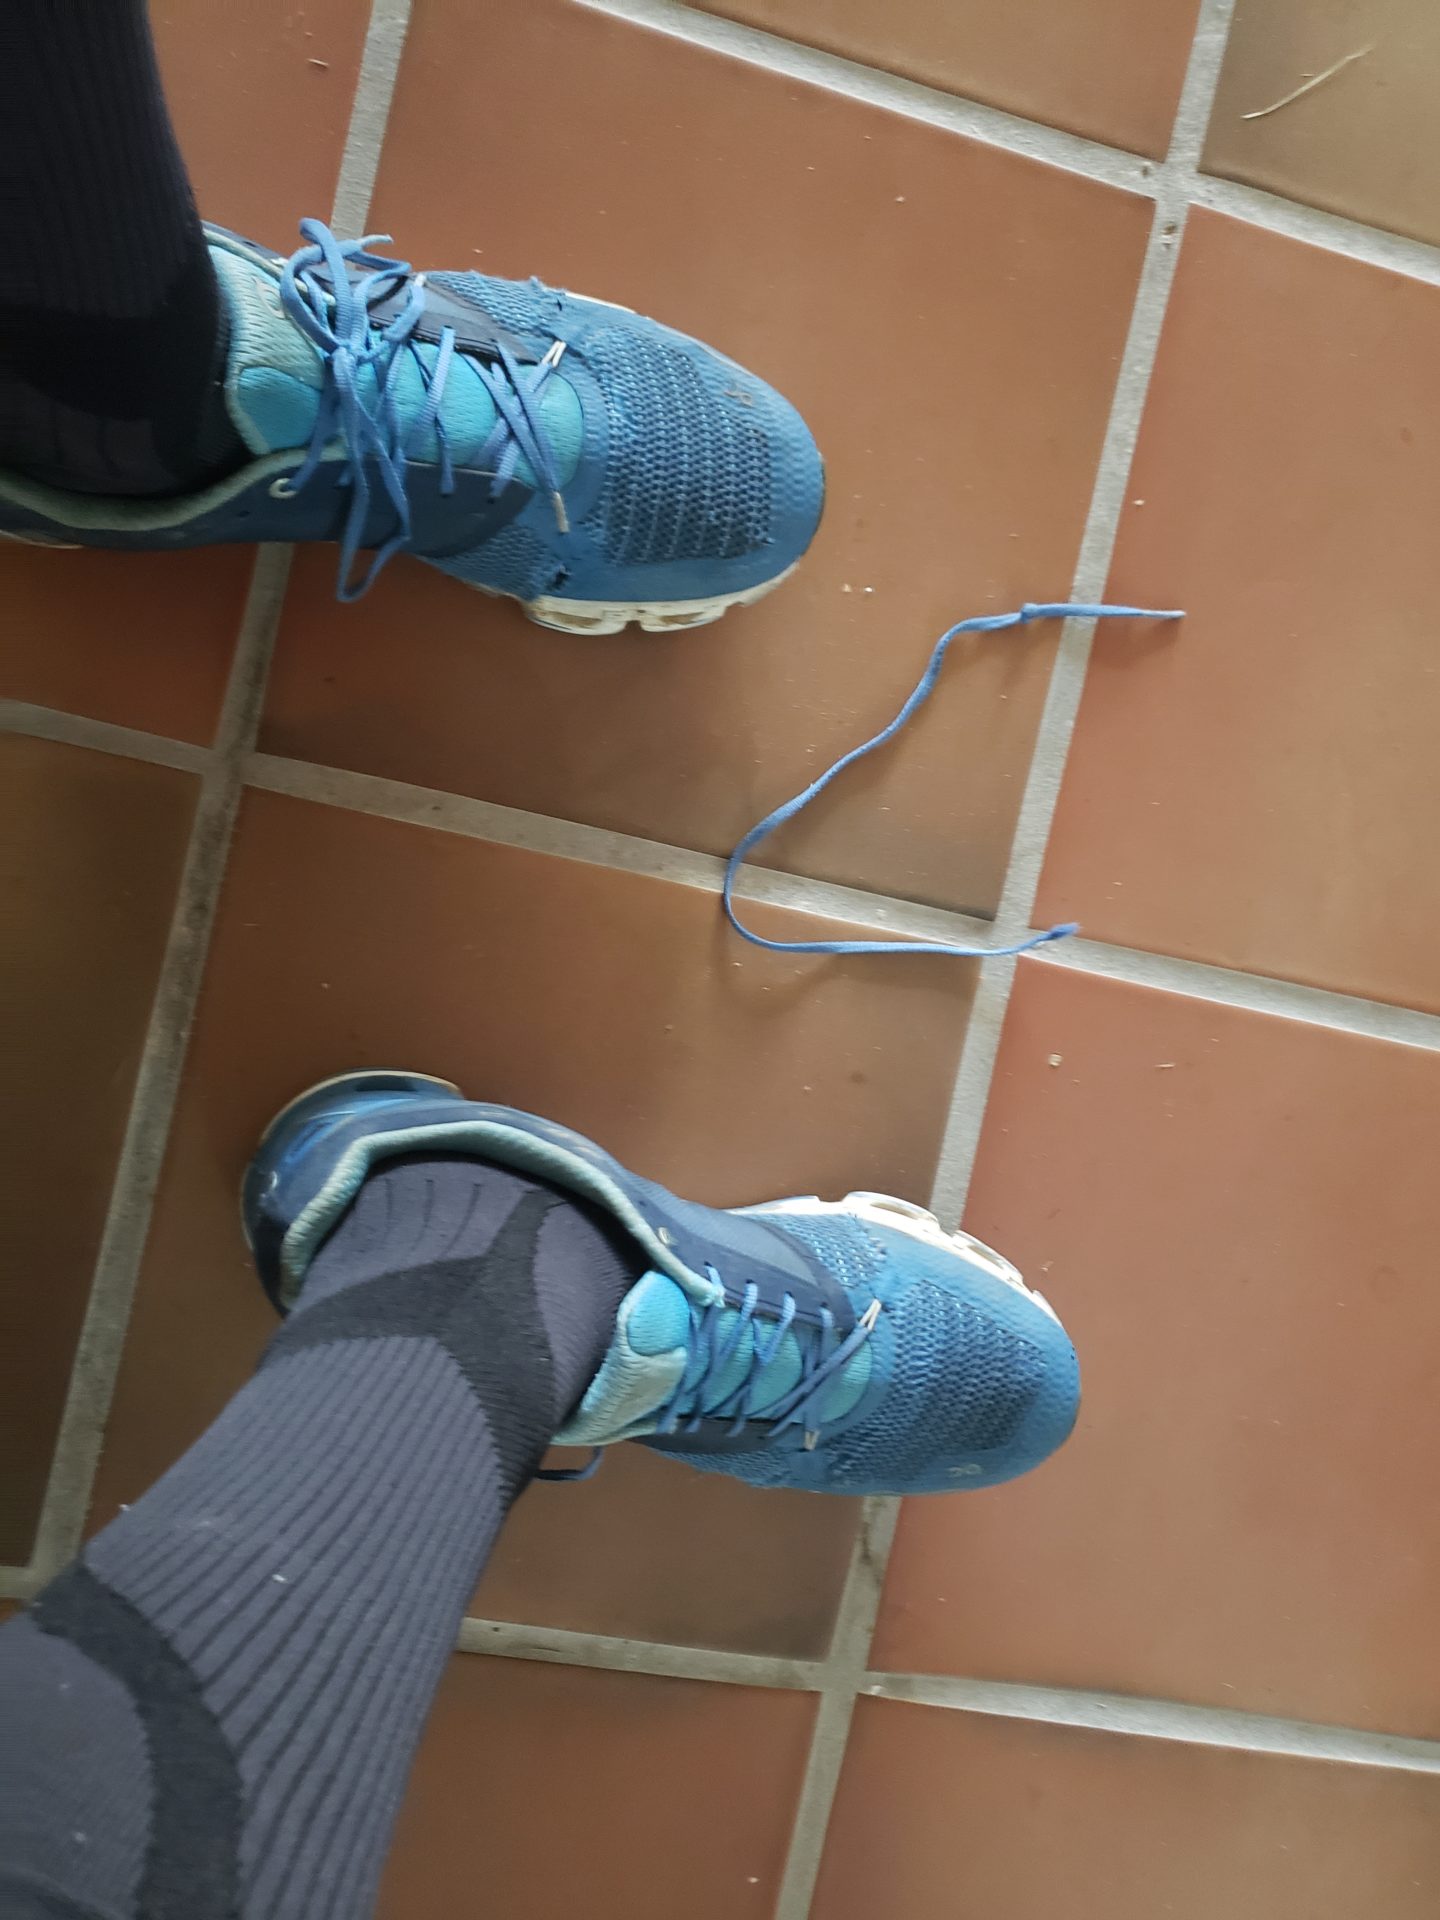 a person's feet with blue shoes and socks